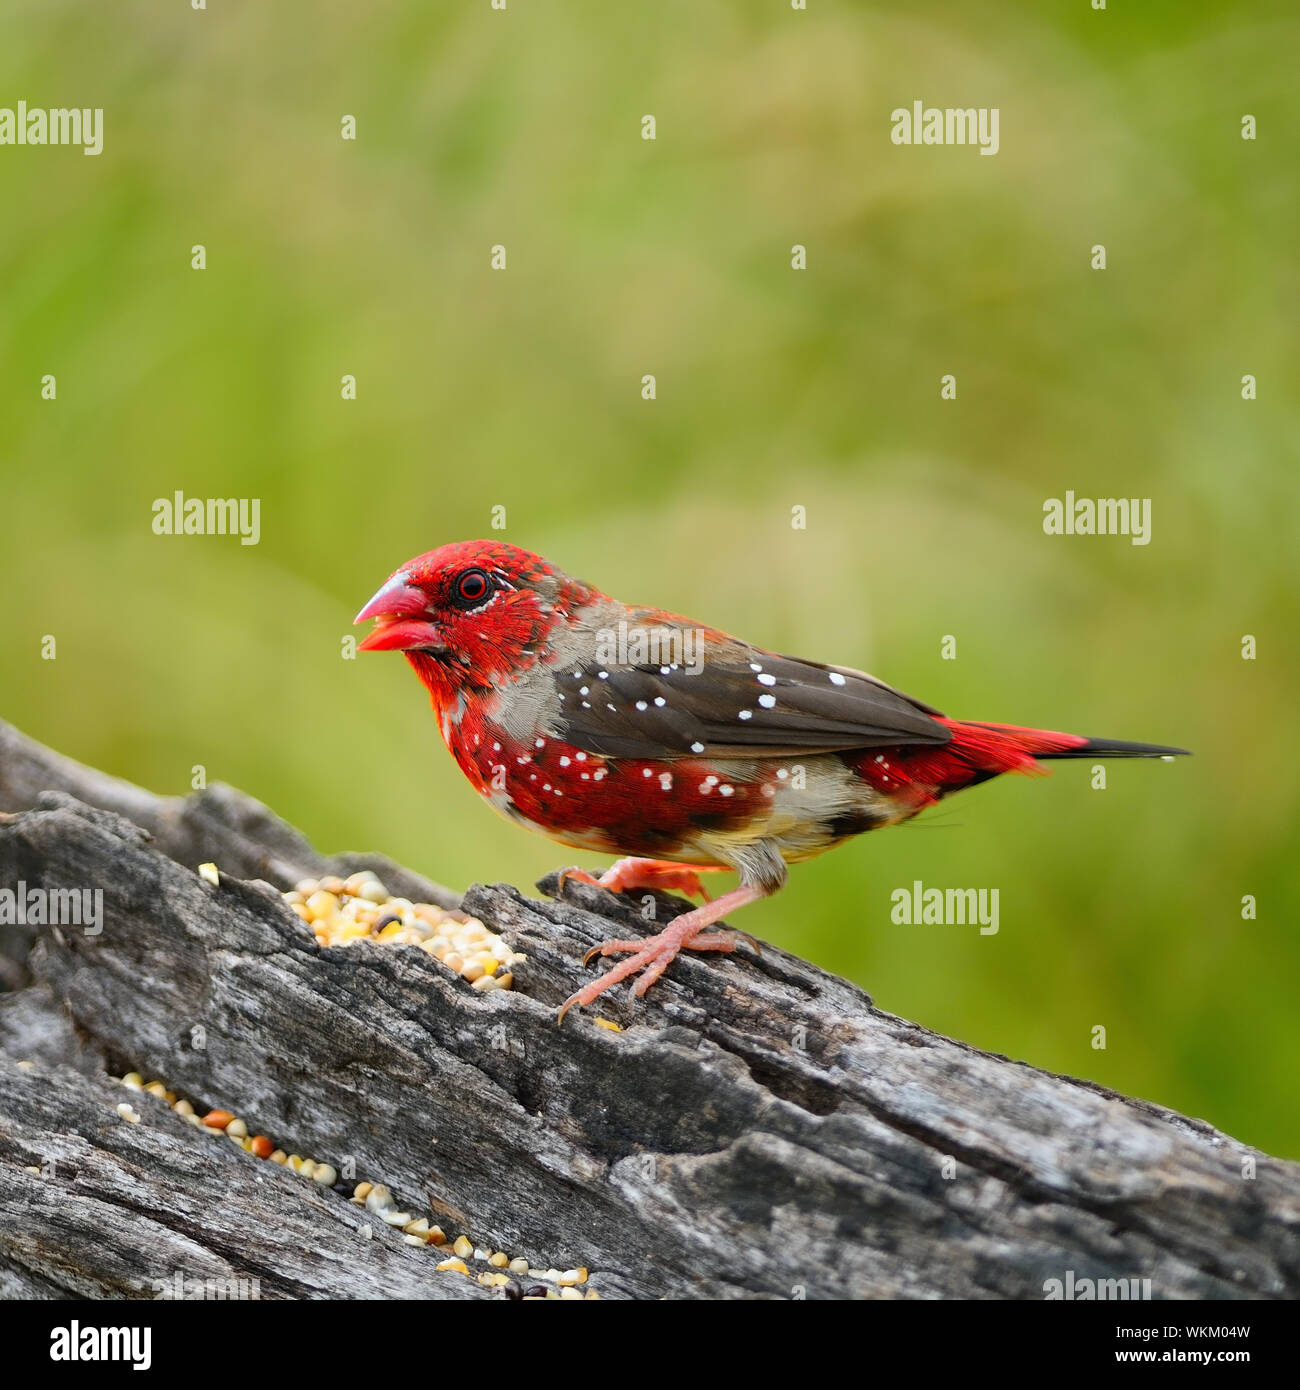 The Stunning Plumage Variations of Strawberry Finches Across Different Regions  